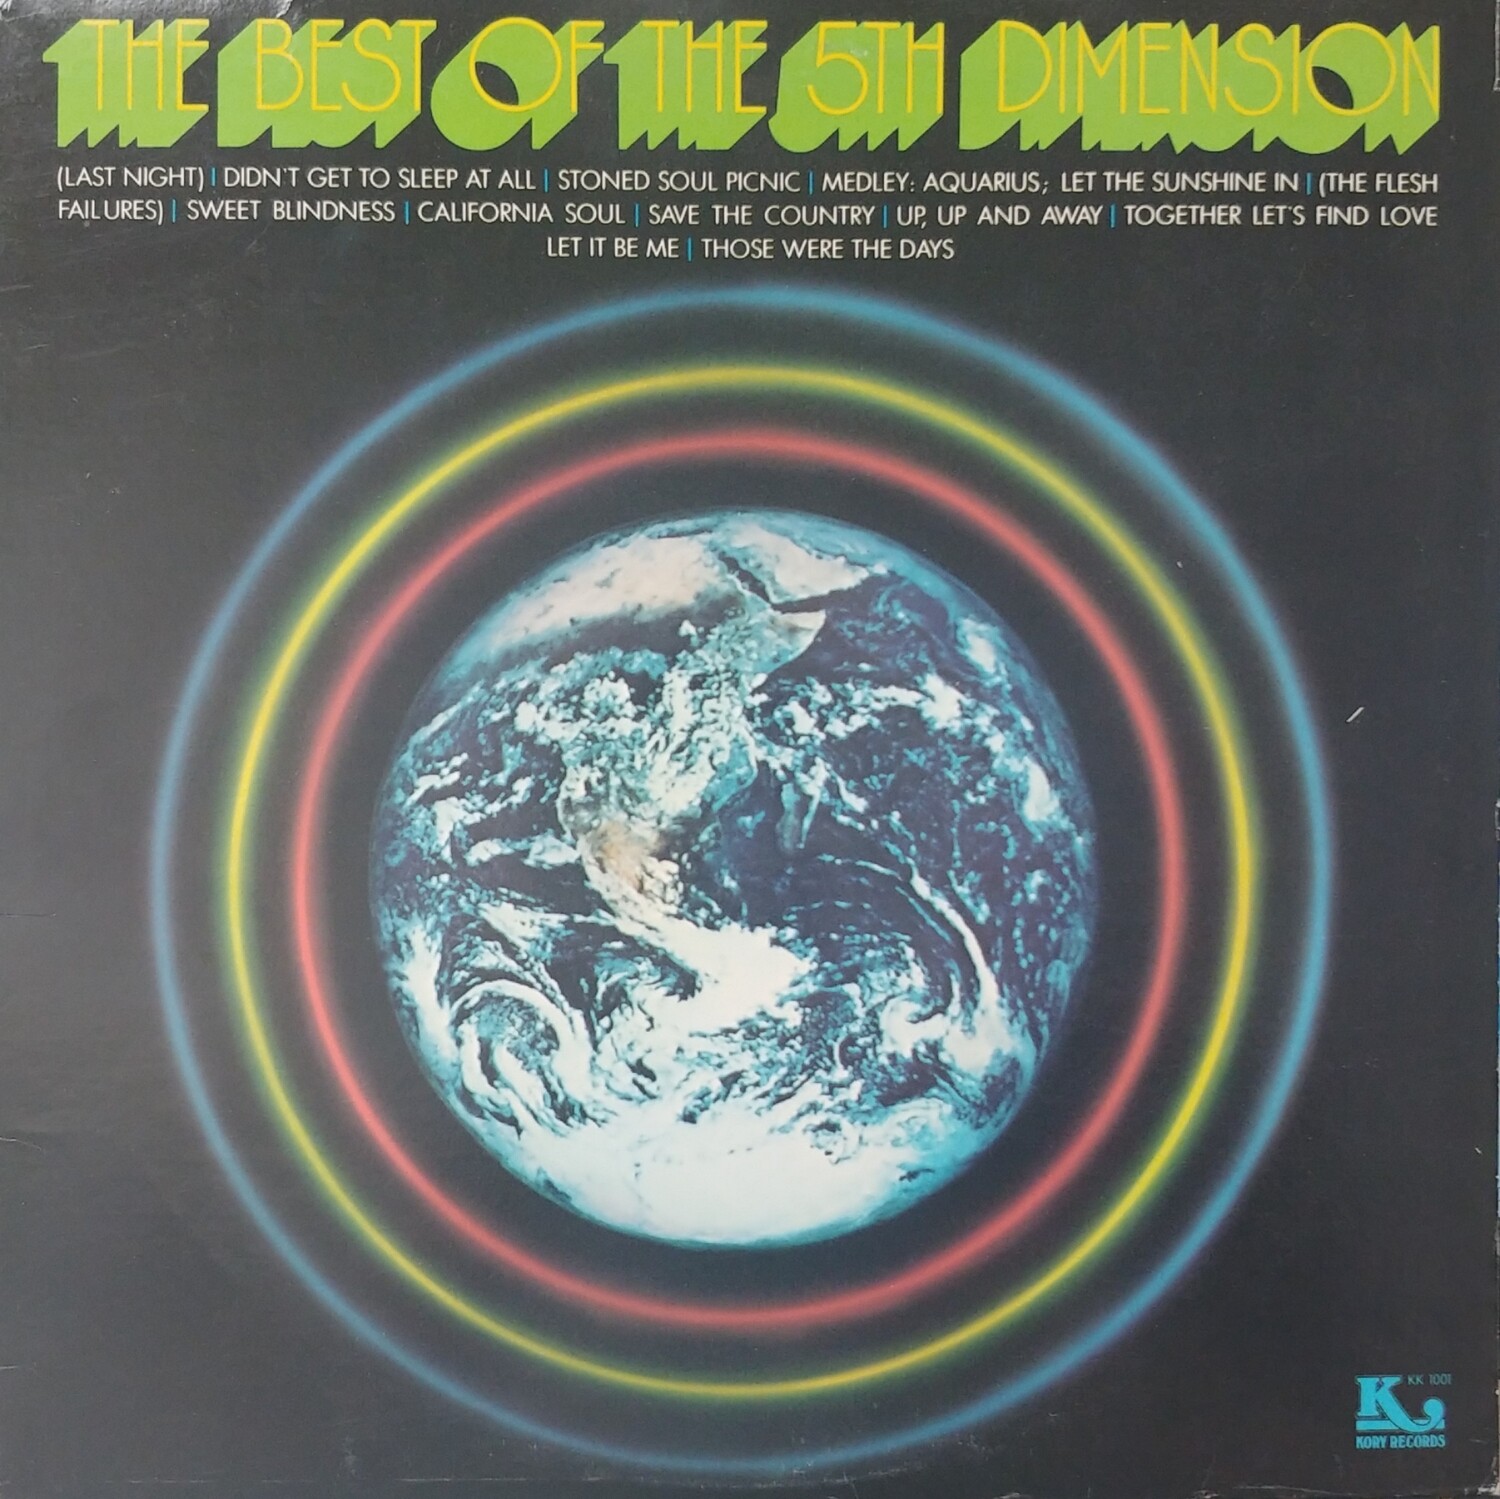 The 5th Dimension - The best of